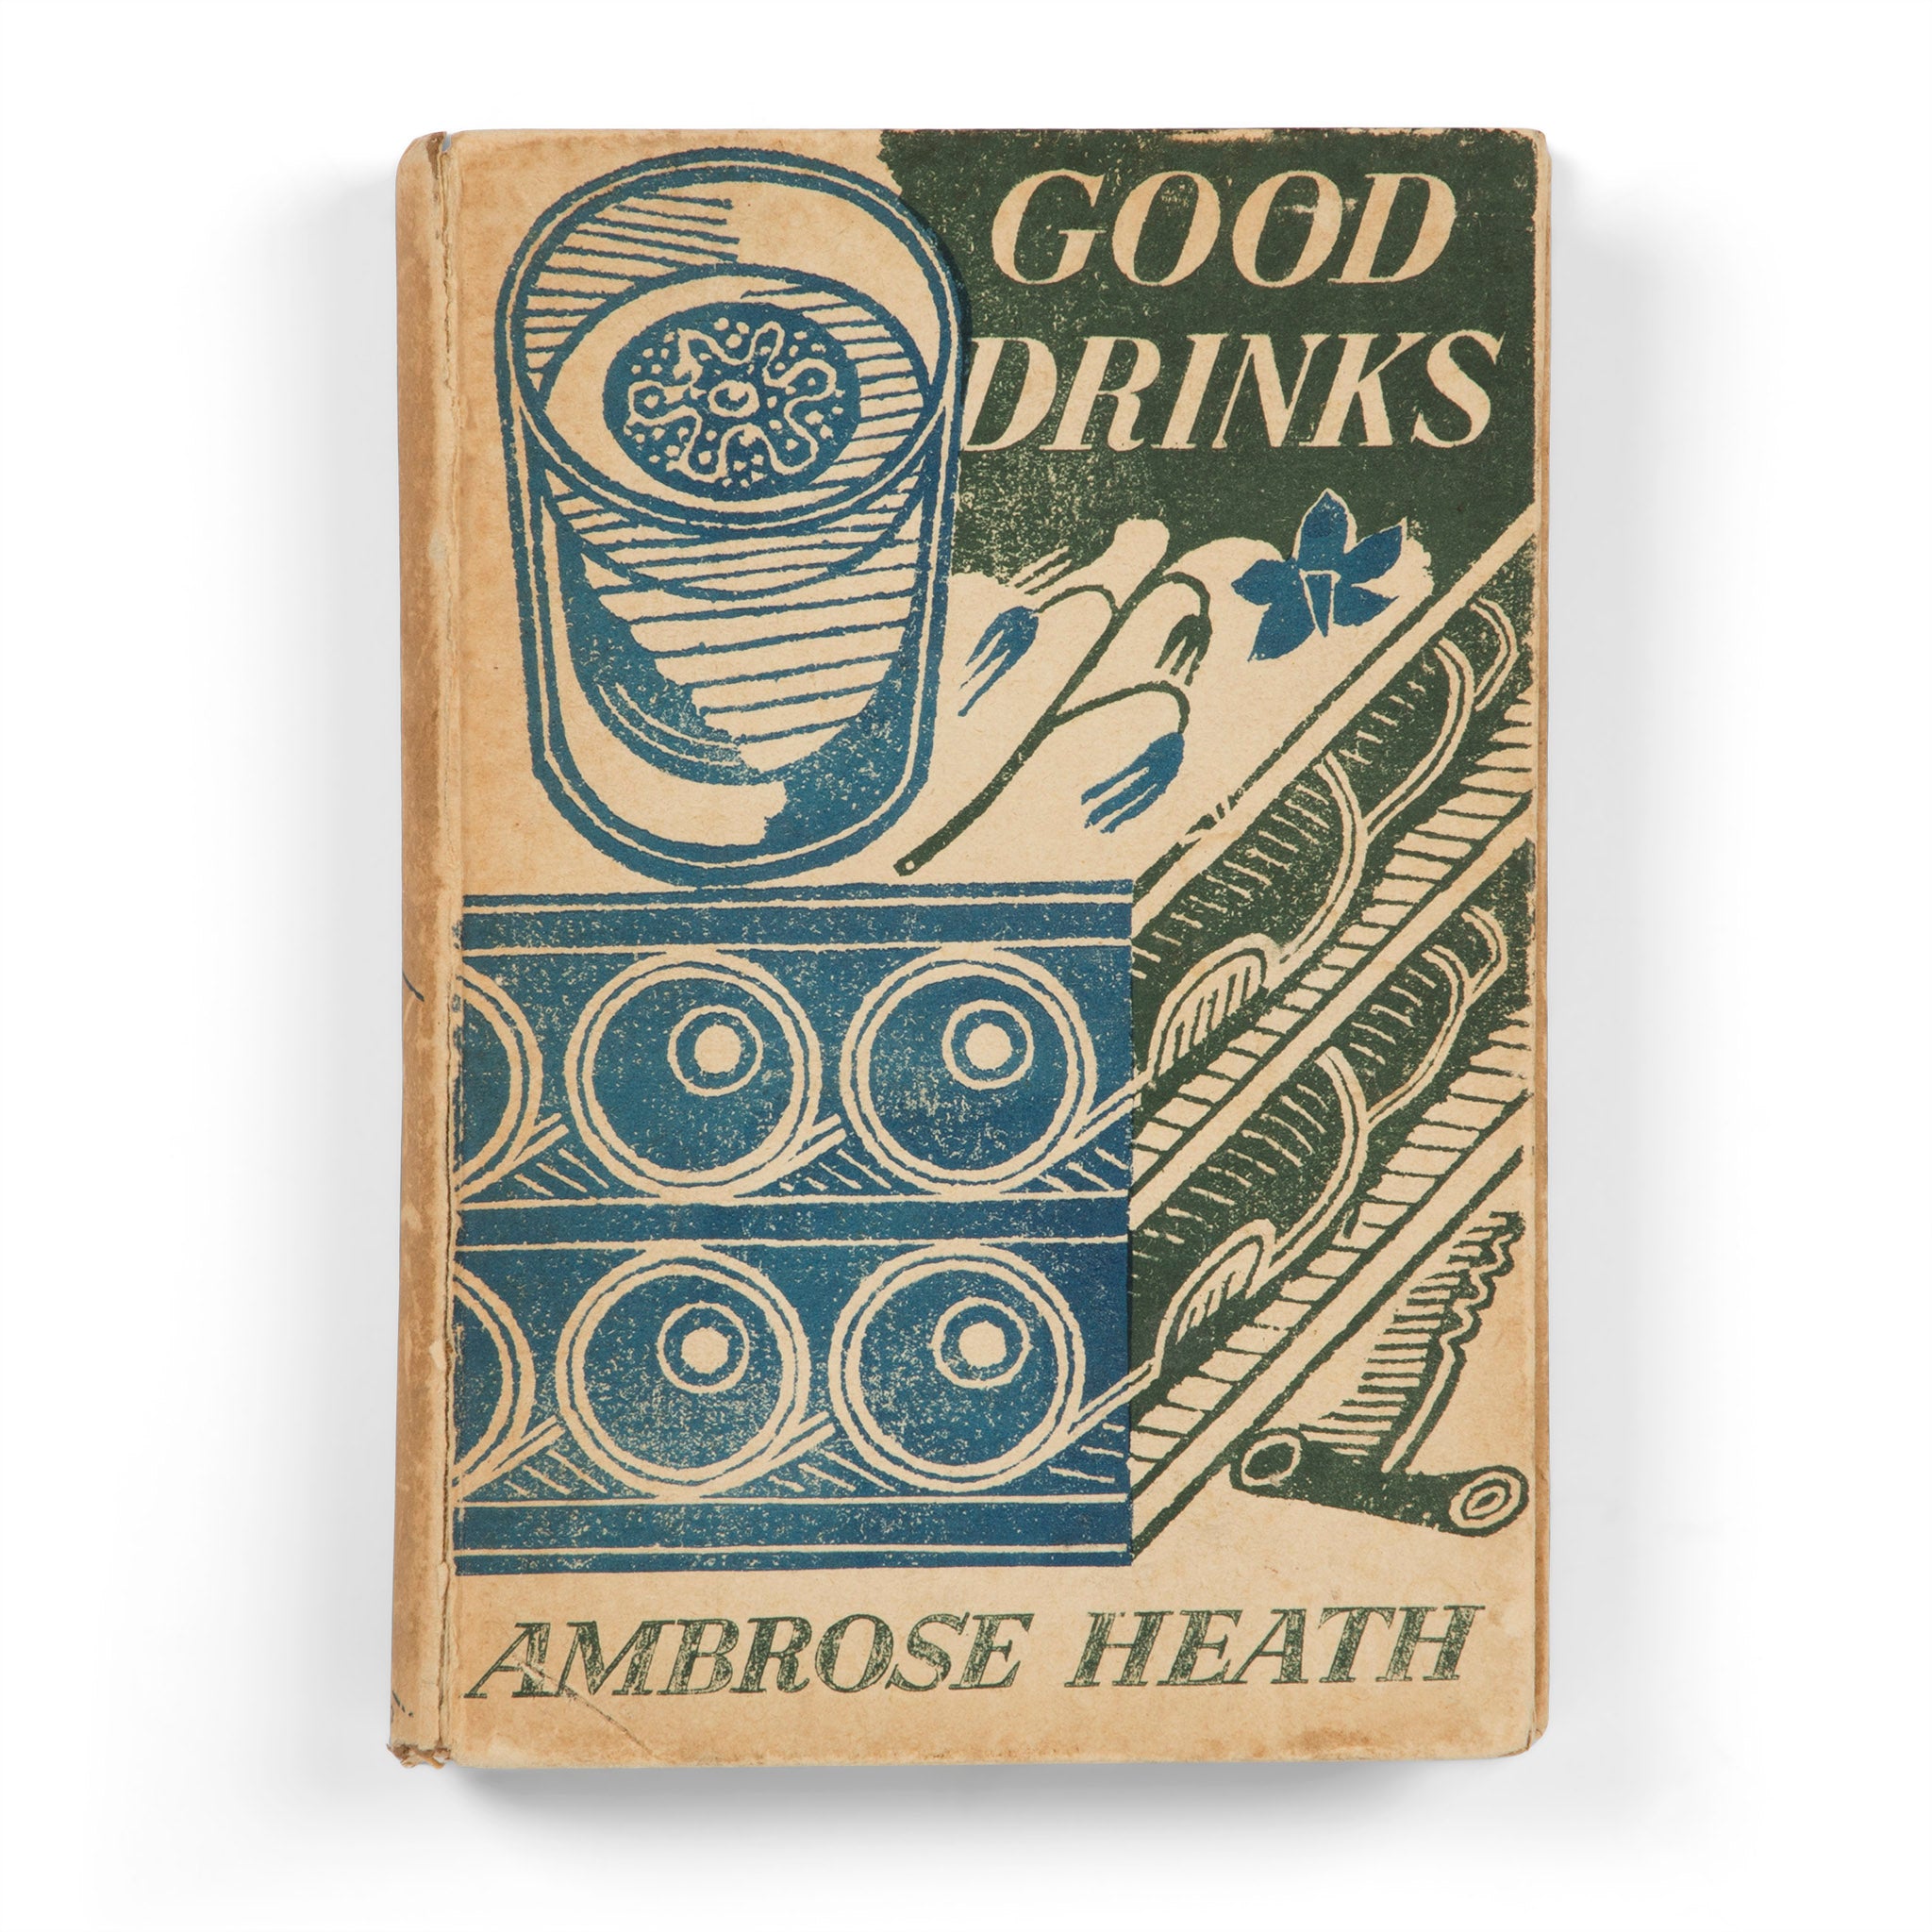 Good Drinks - First Edition - by Ambrose Health